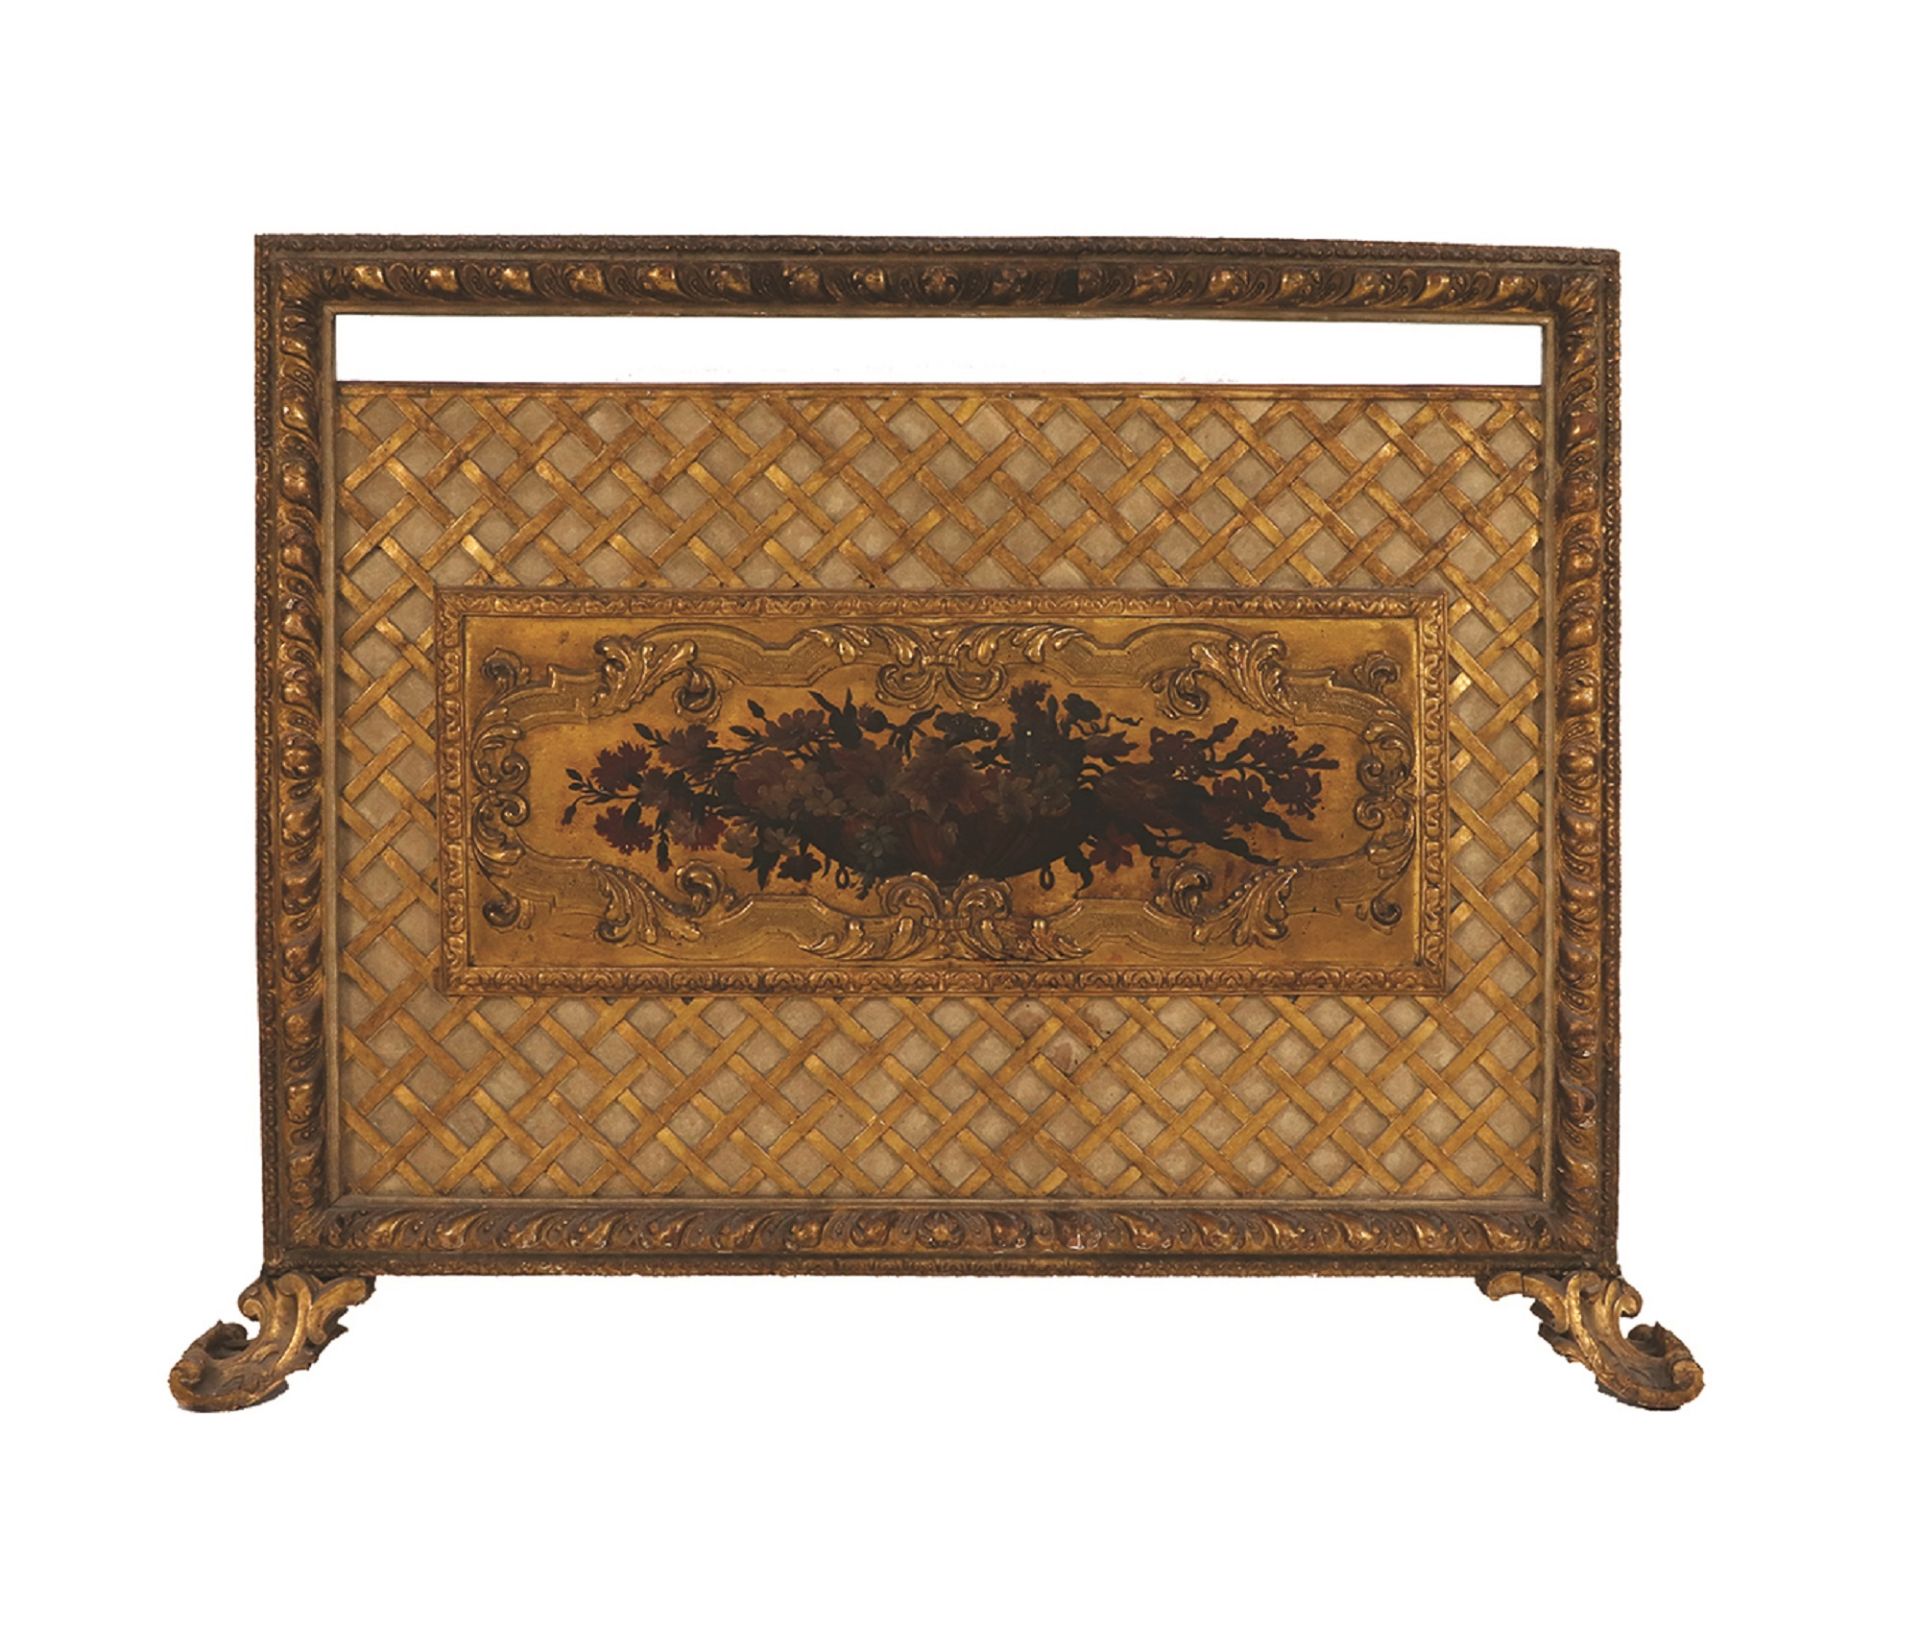 An ivory lacquered and painted gilt wood rectangular panel 122x145x19cm.